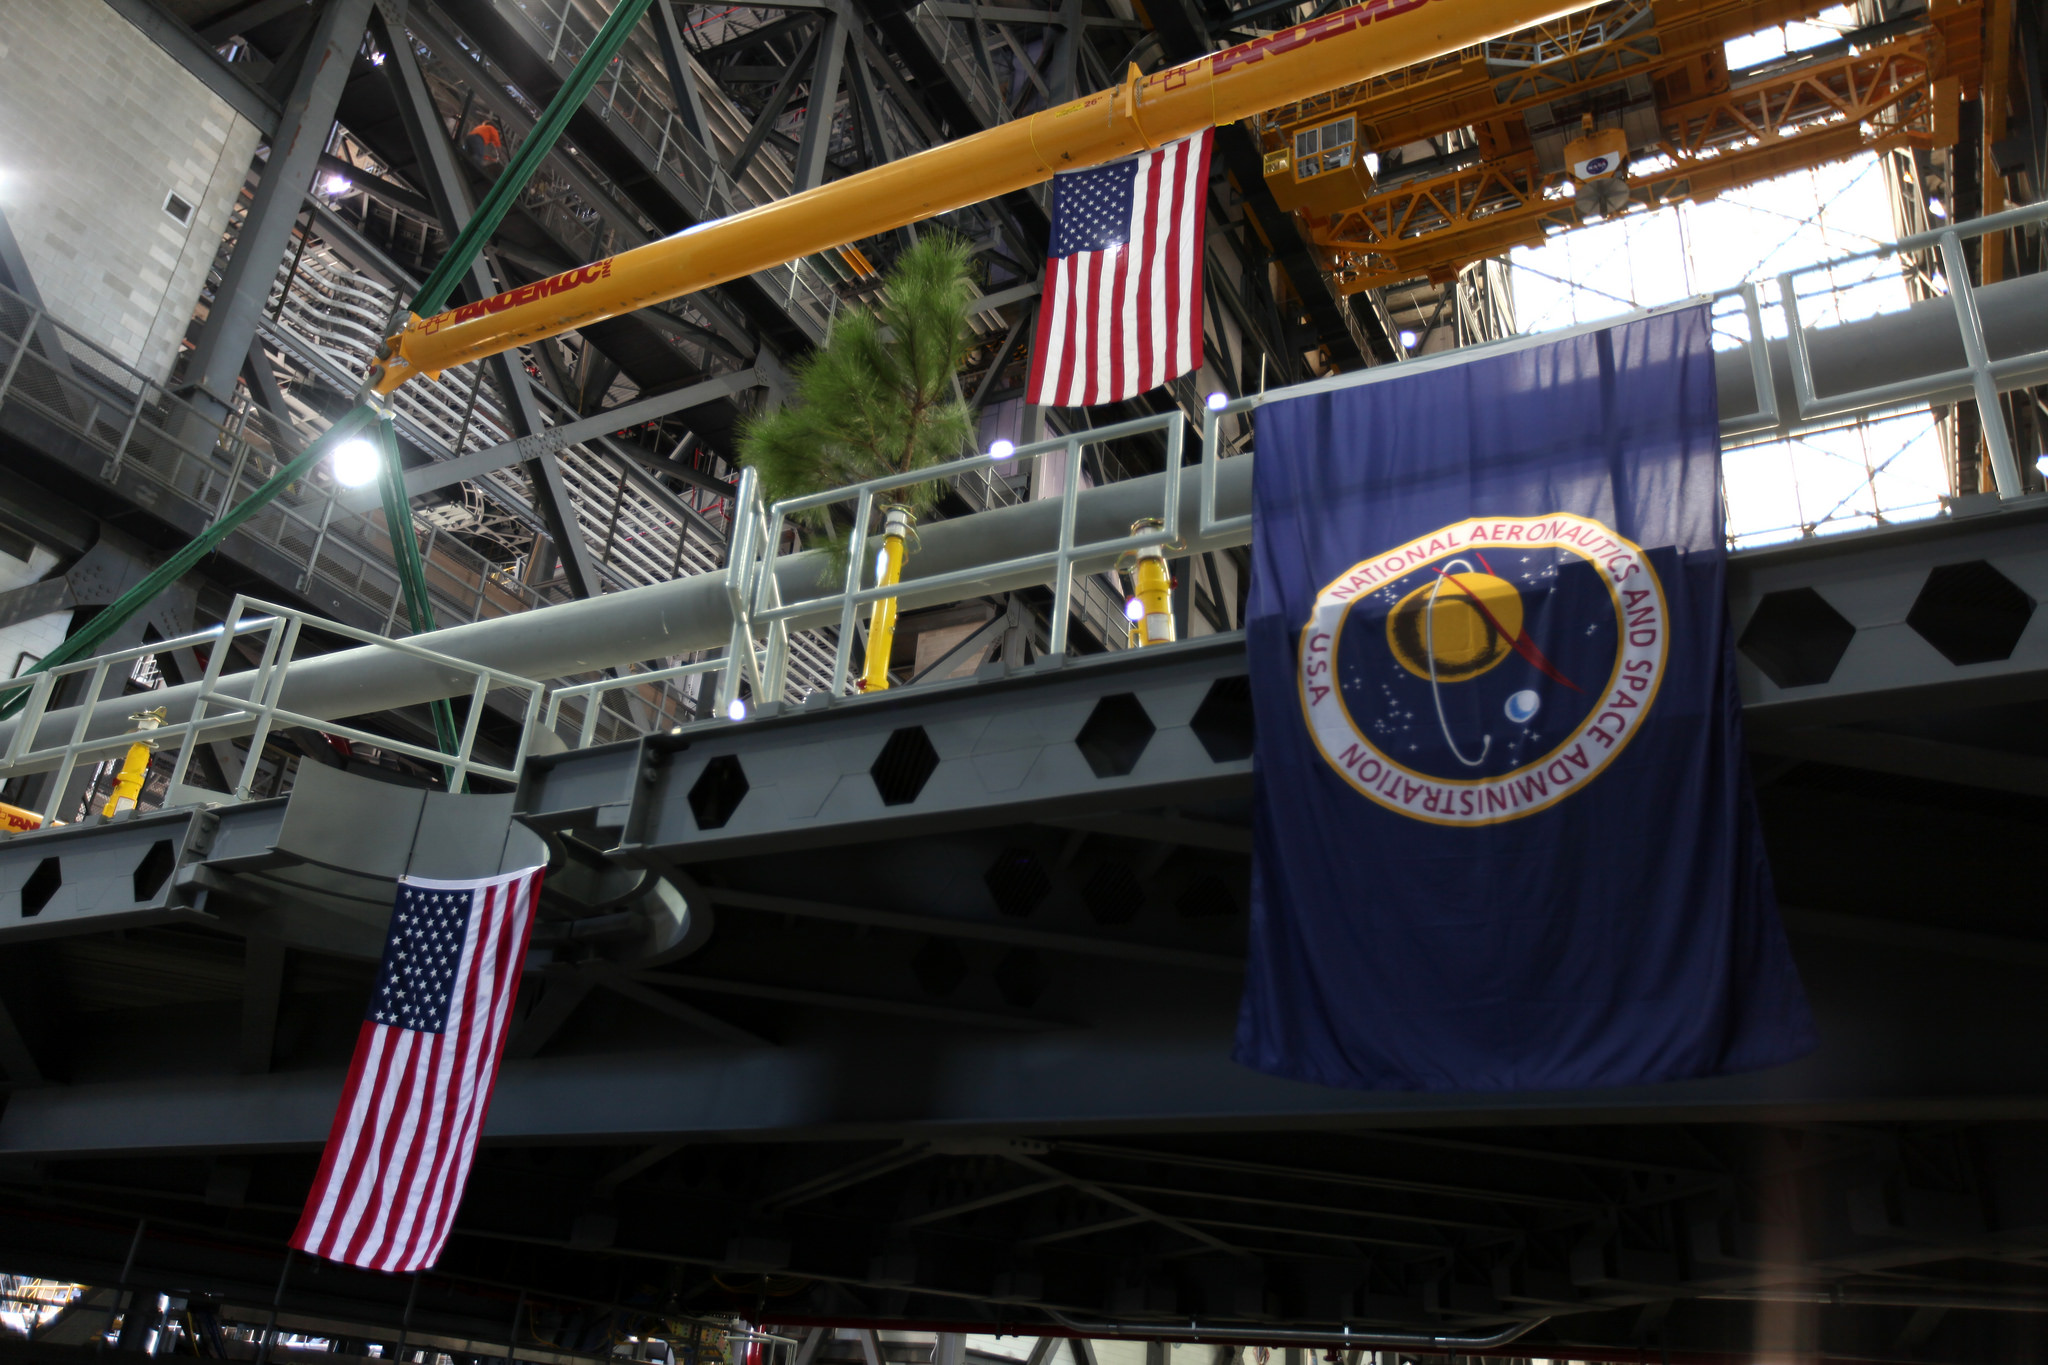 The American flag is in view on the final work platform, A north, as it the platform is lifted for installation in the VAB.